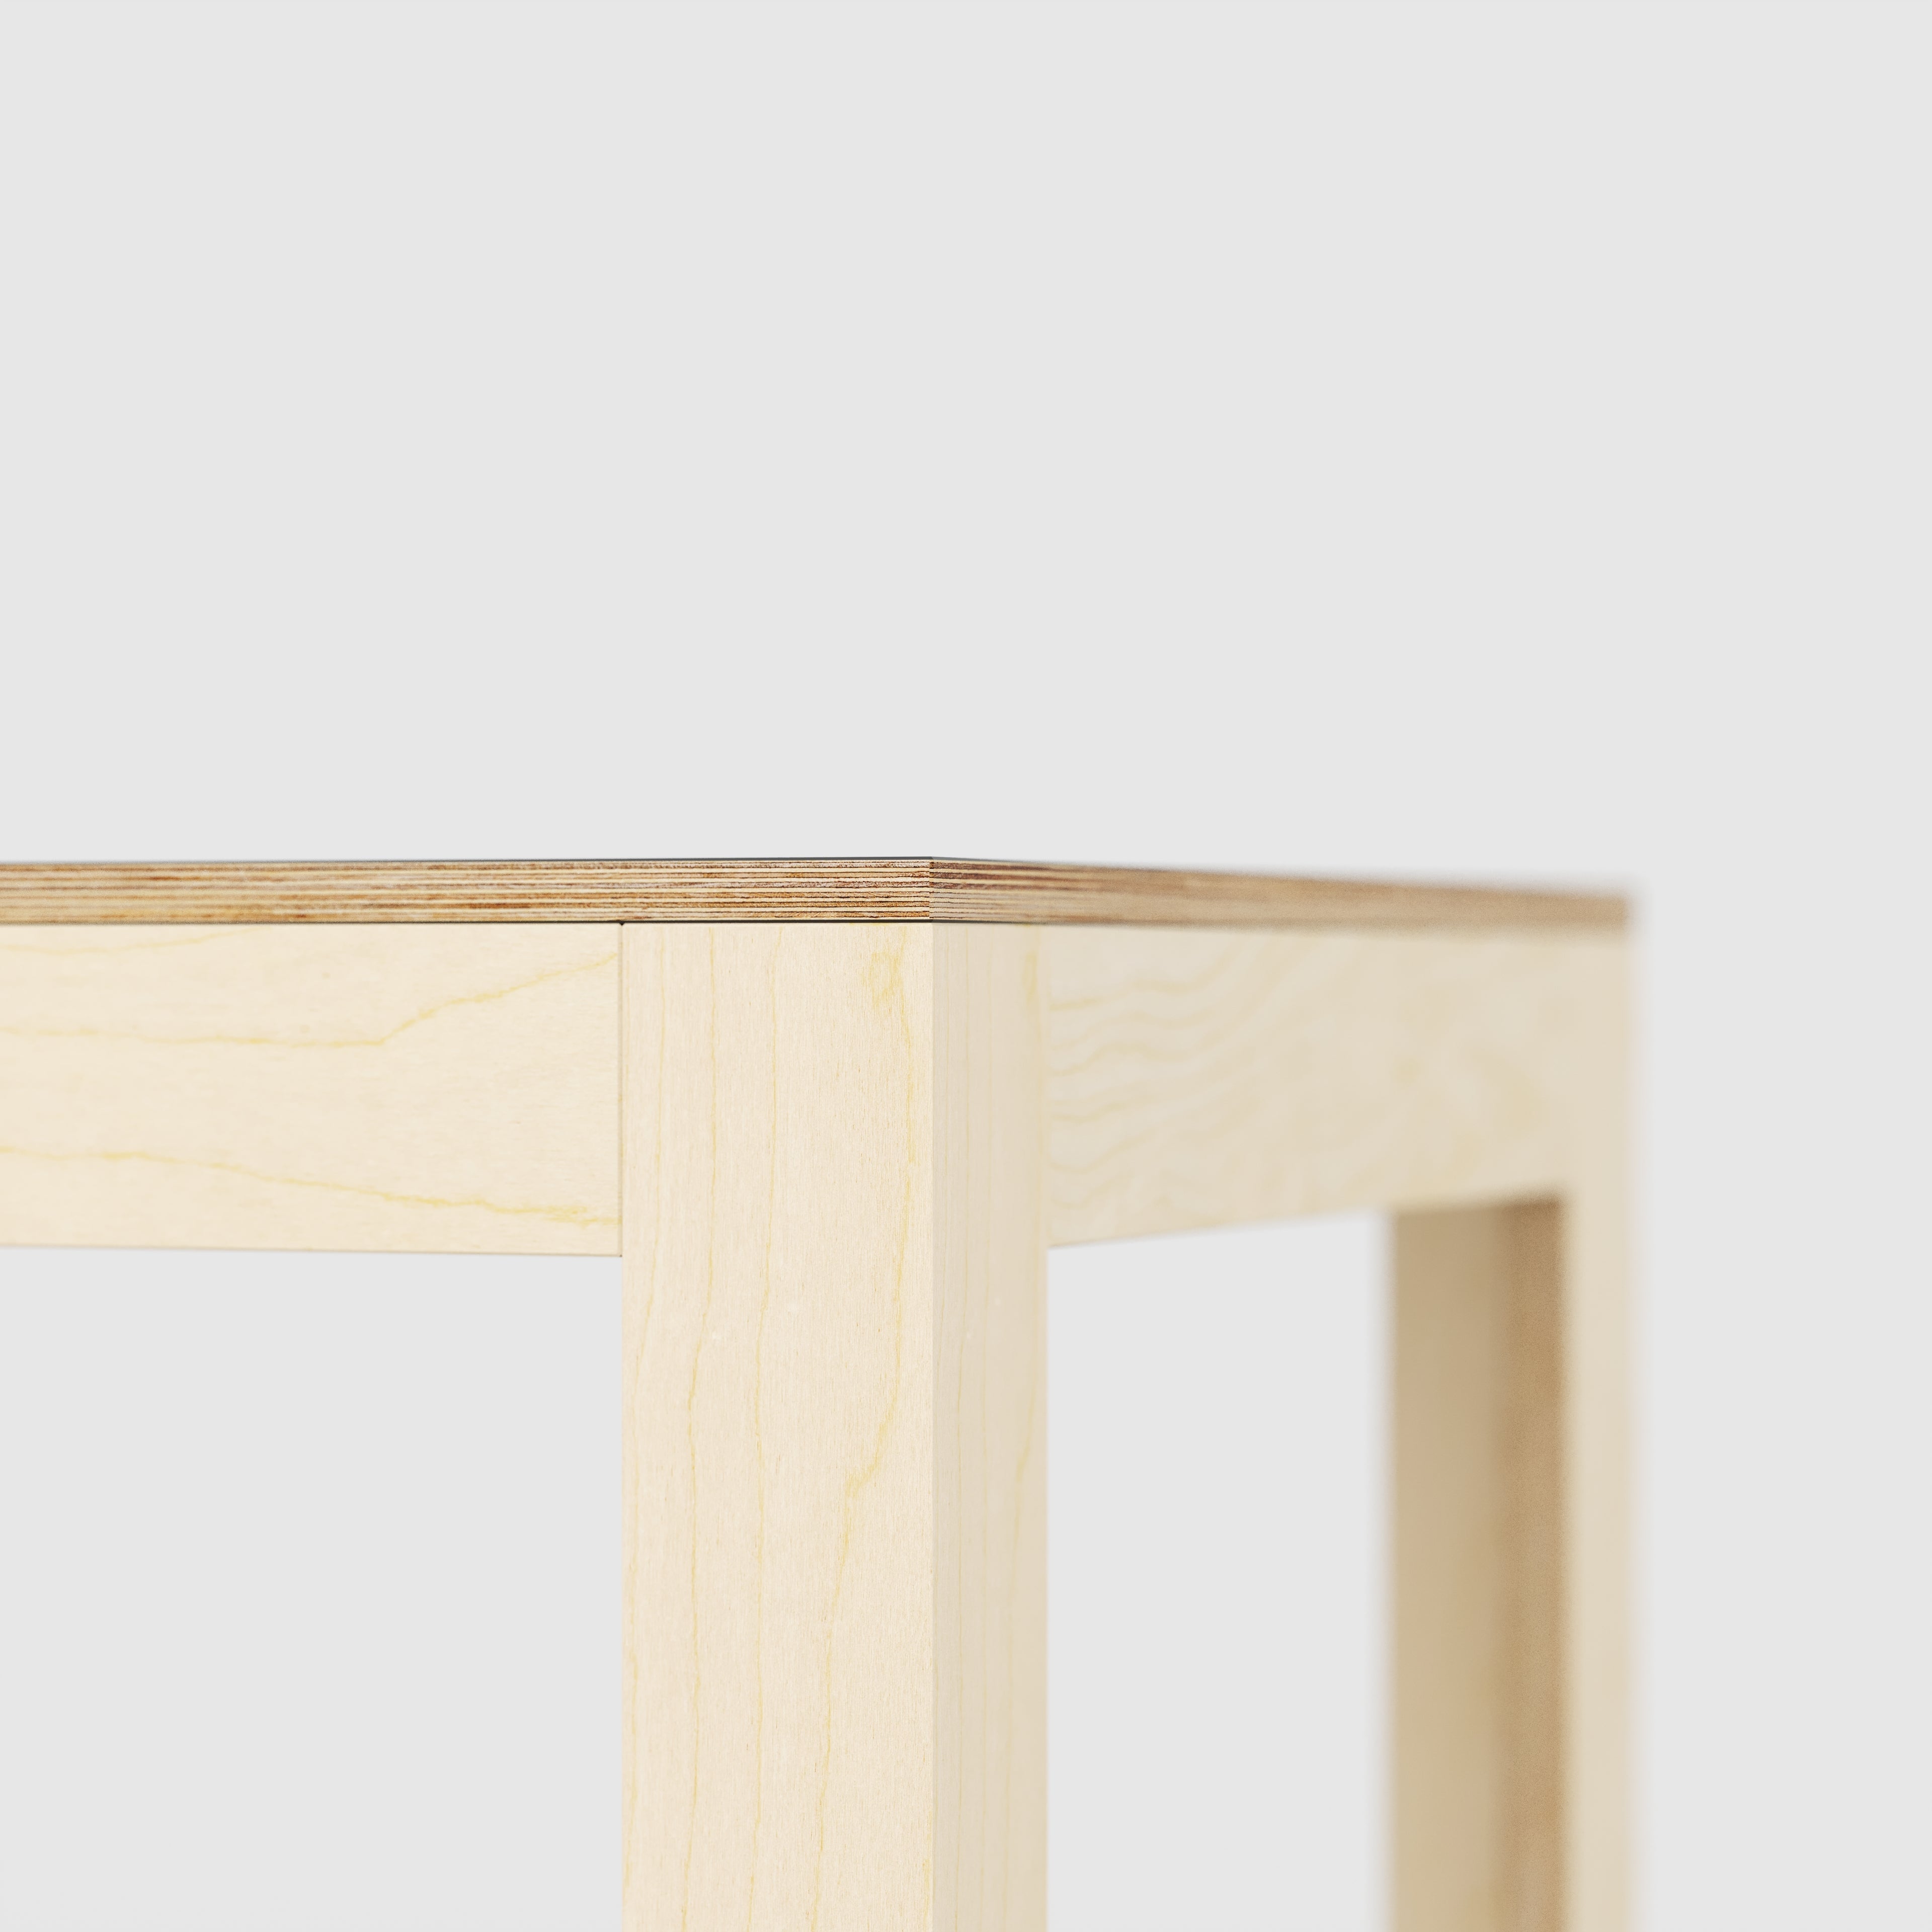 Table with Solid Frame - Plywood Birch - 1600(w) x 800(d) x 750(h)